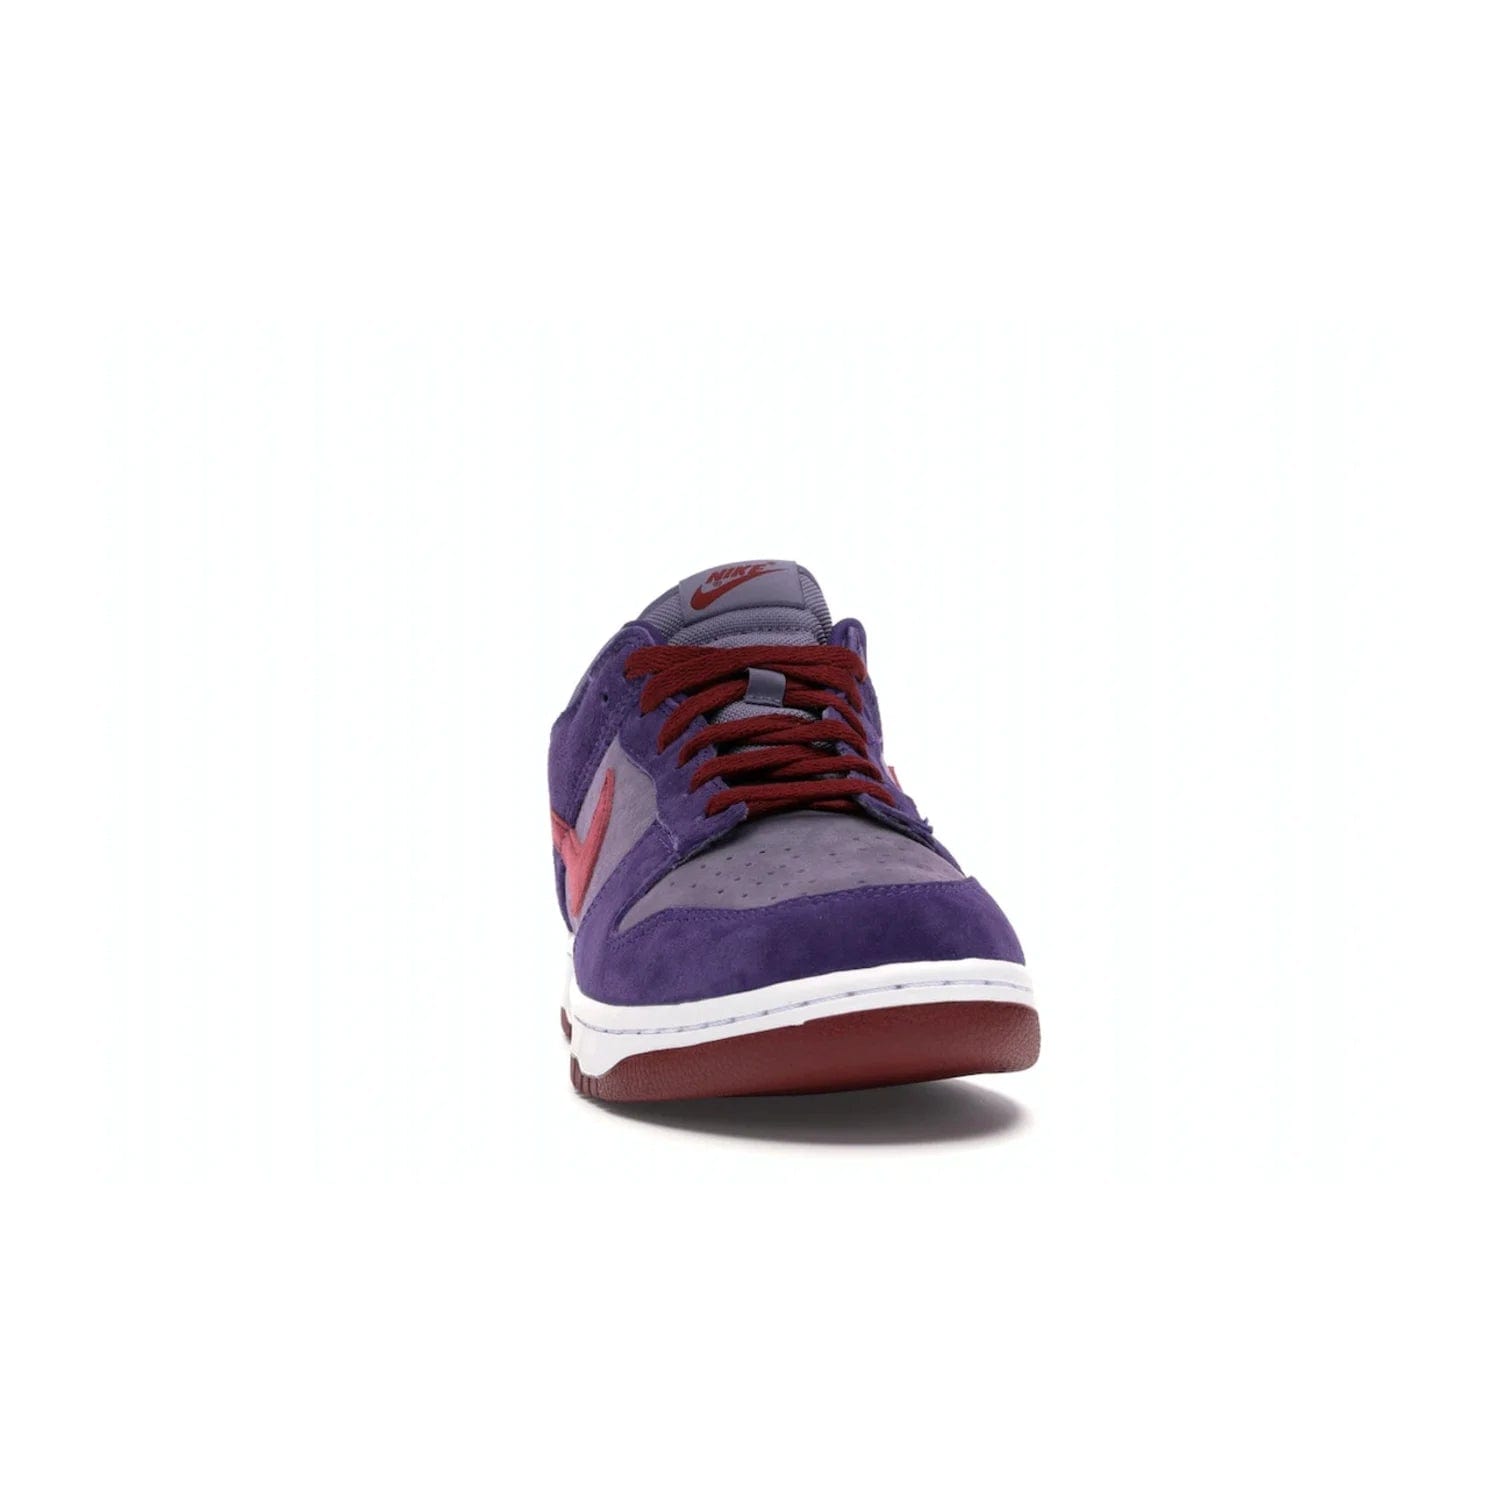 Nike Dunk Low Plum (2020) - Image 9 - Only at www.BallersClubKickz.com - Elevate your look with the Nike Dunk Low Plum (2020). Featuring a bold purple colorway, this retro-inspired silhouette is constructed of premium suede and makes for a must-have for any sneakerhead.